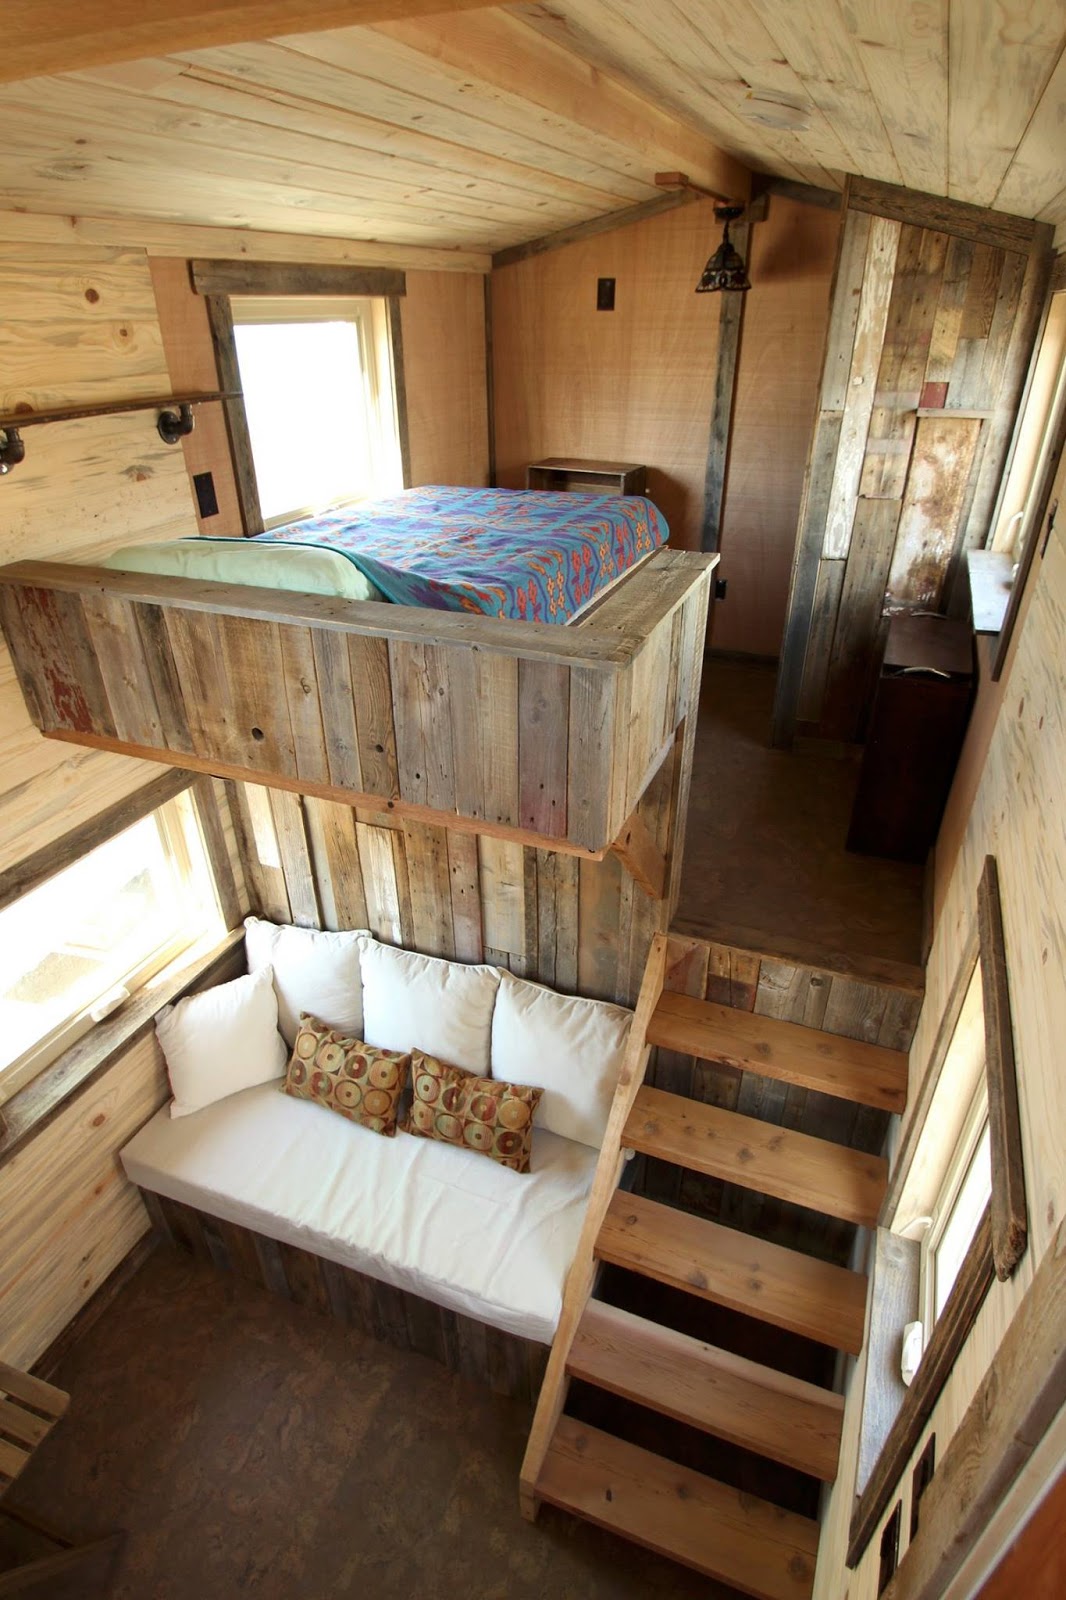 jj's place from simblissity tiny homes - tiny house town